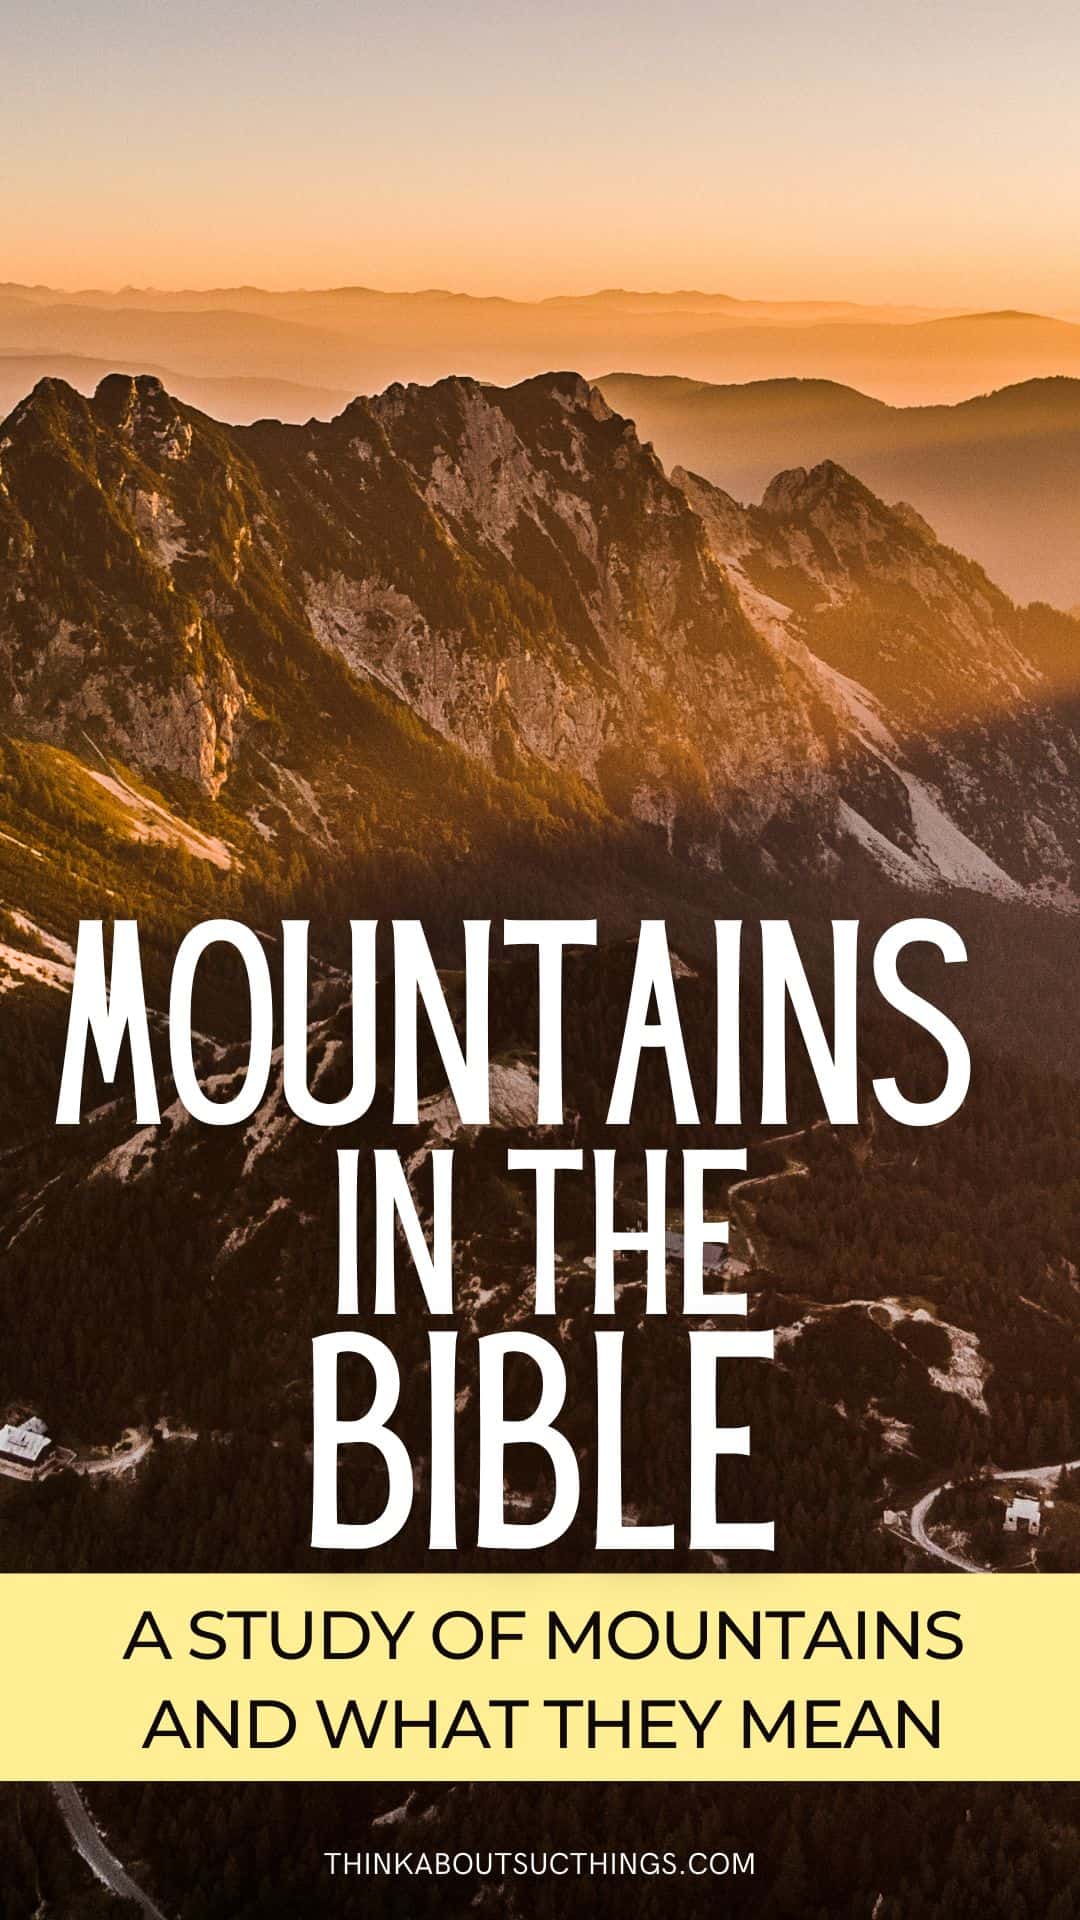 Mountains In The Bible: Symbolism And Significance | Think About Such ...